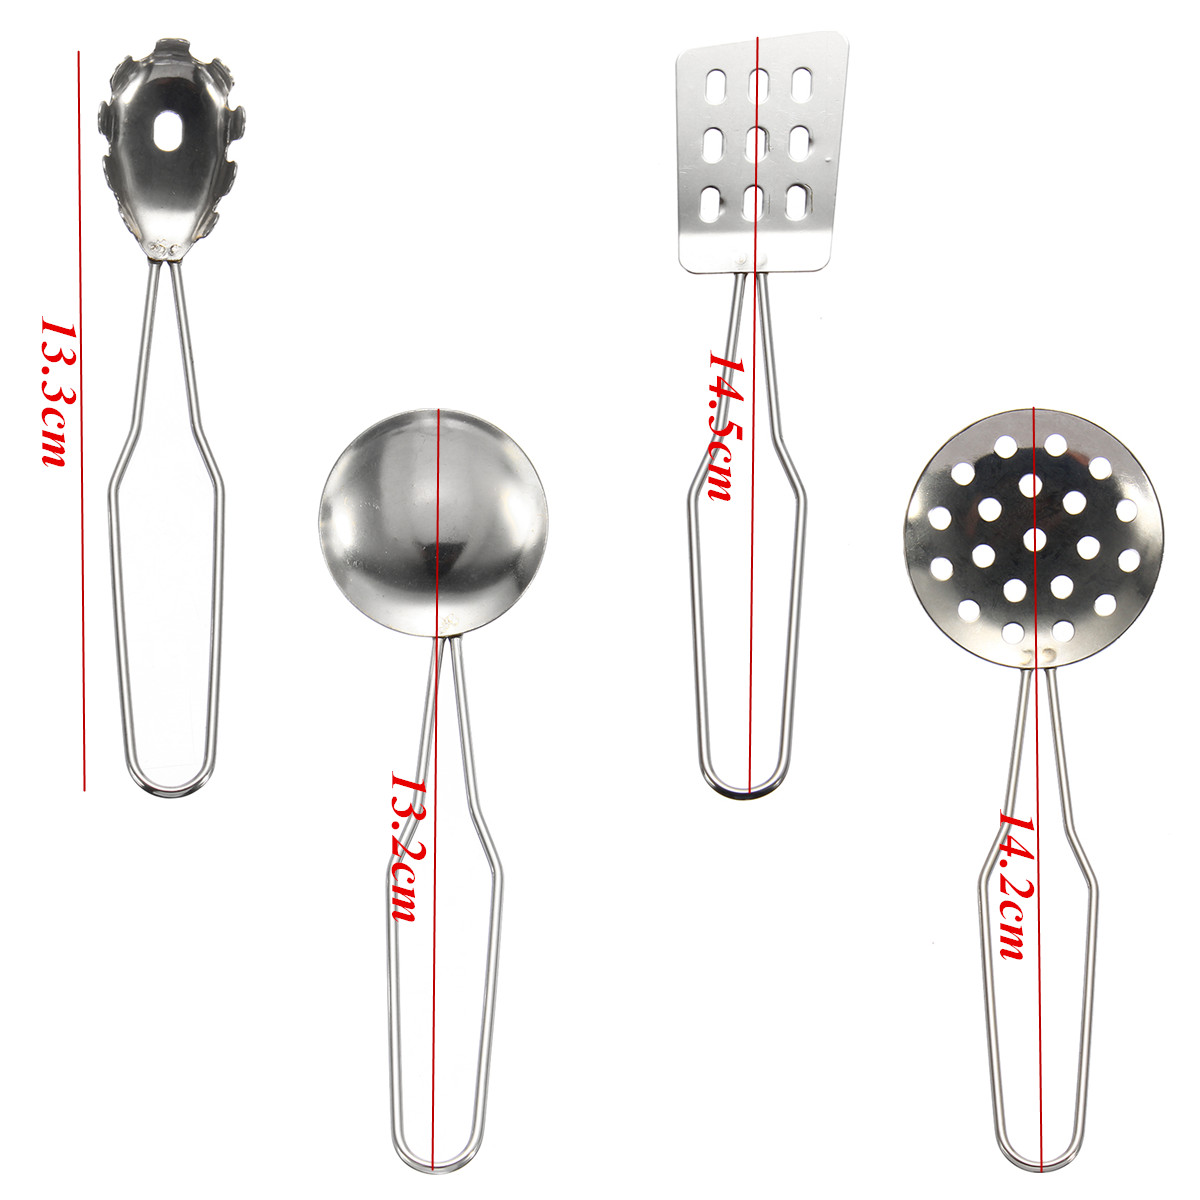 10pc-Stainless-steel-Cookware-Kitchen-Cooking-Set-Pot-Pans-House-Play-Toy-For-Children-1418086-11